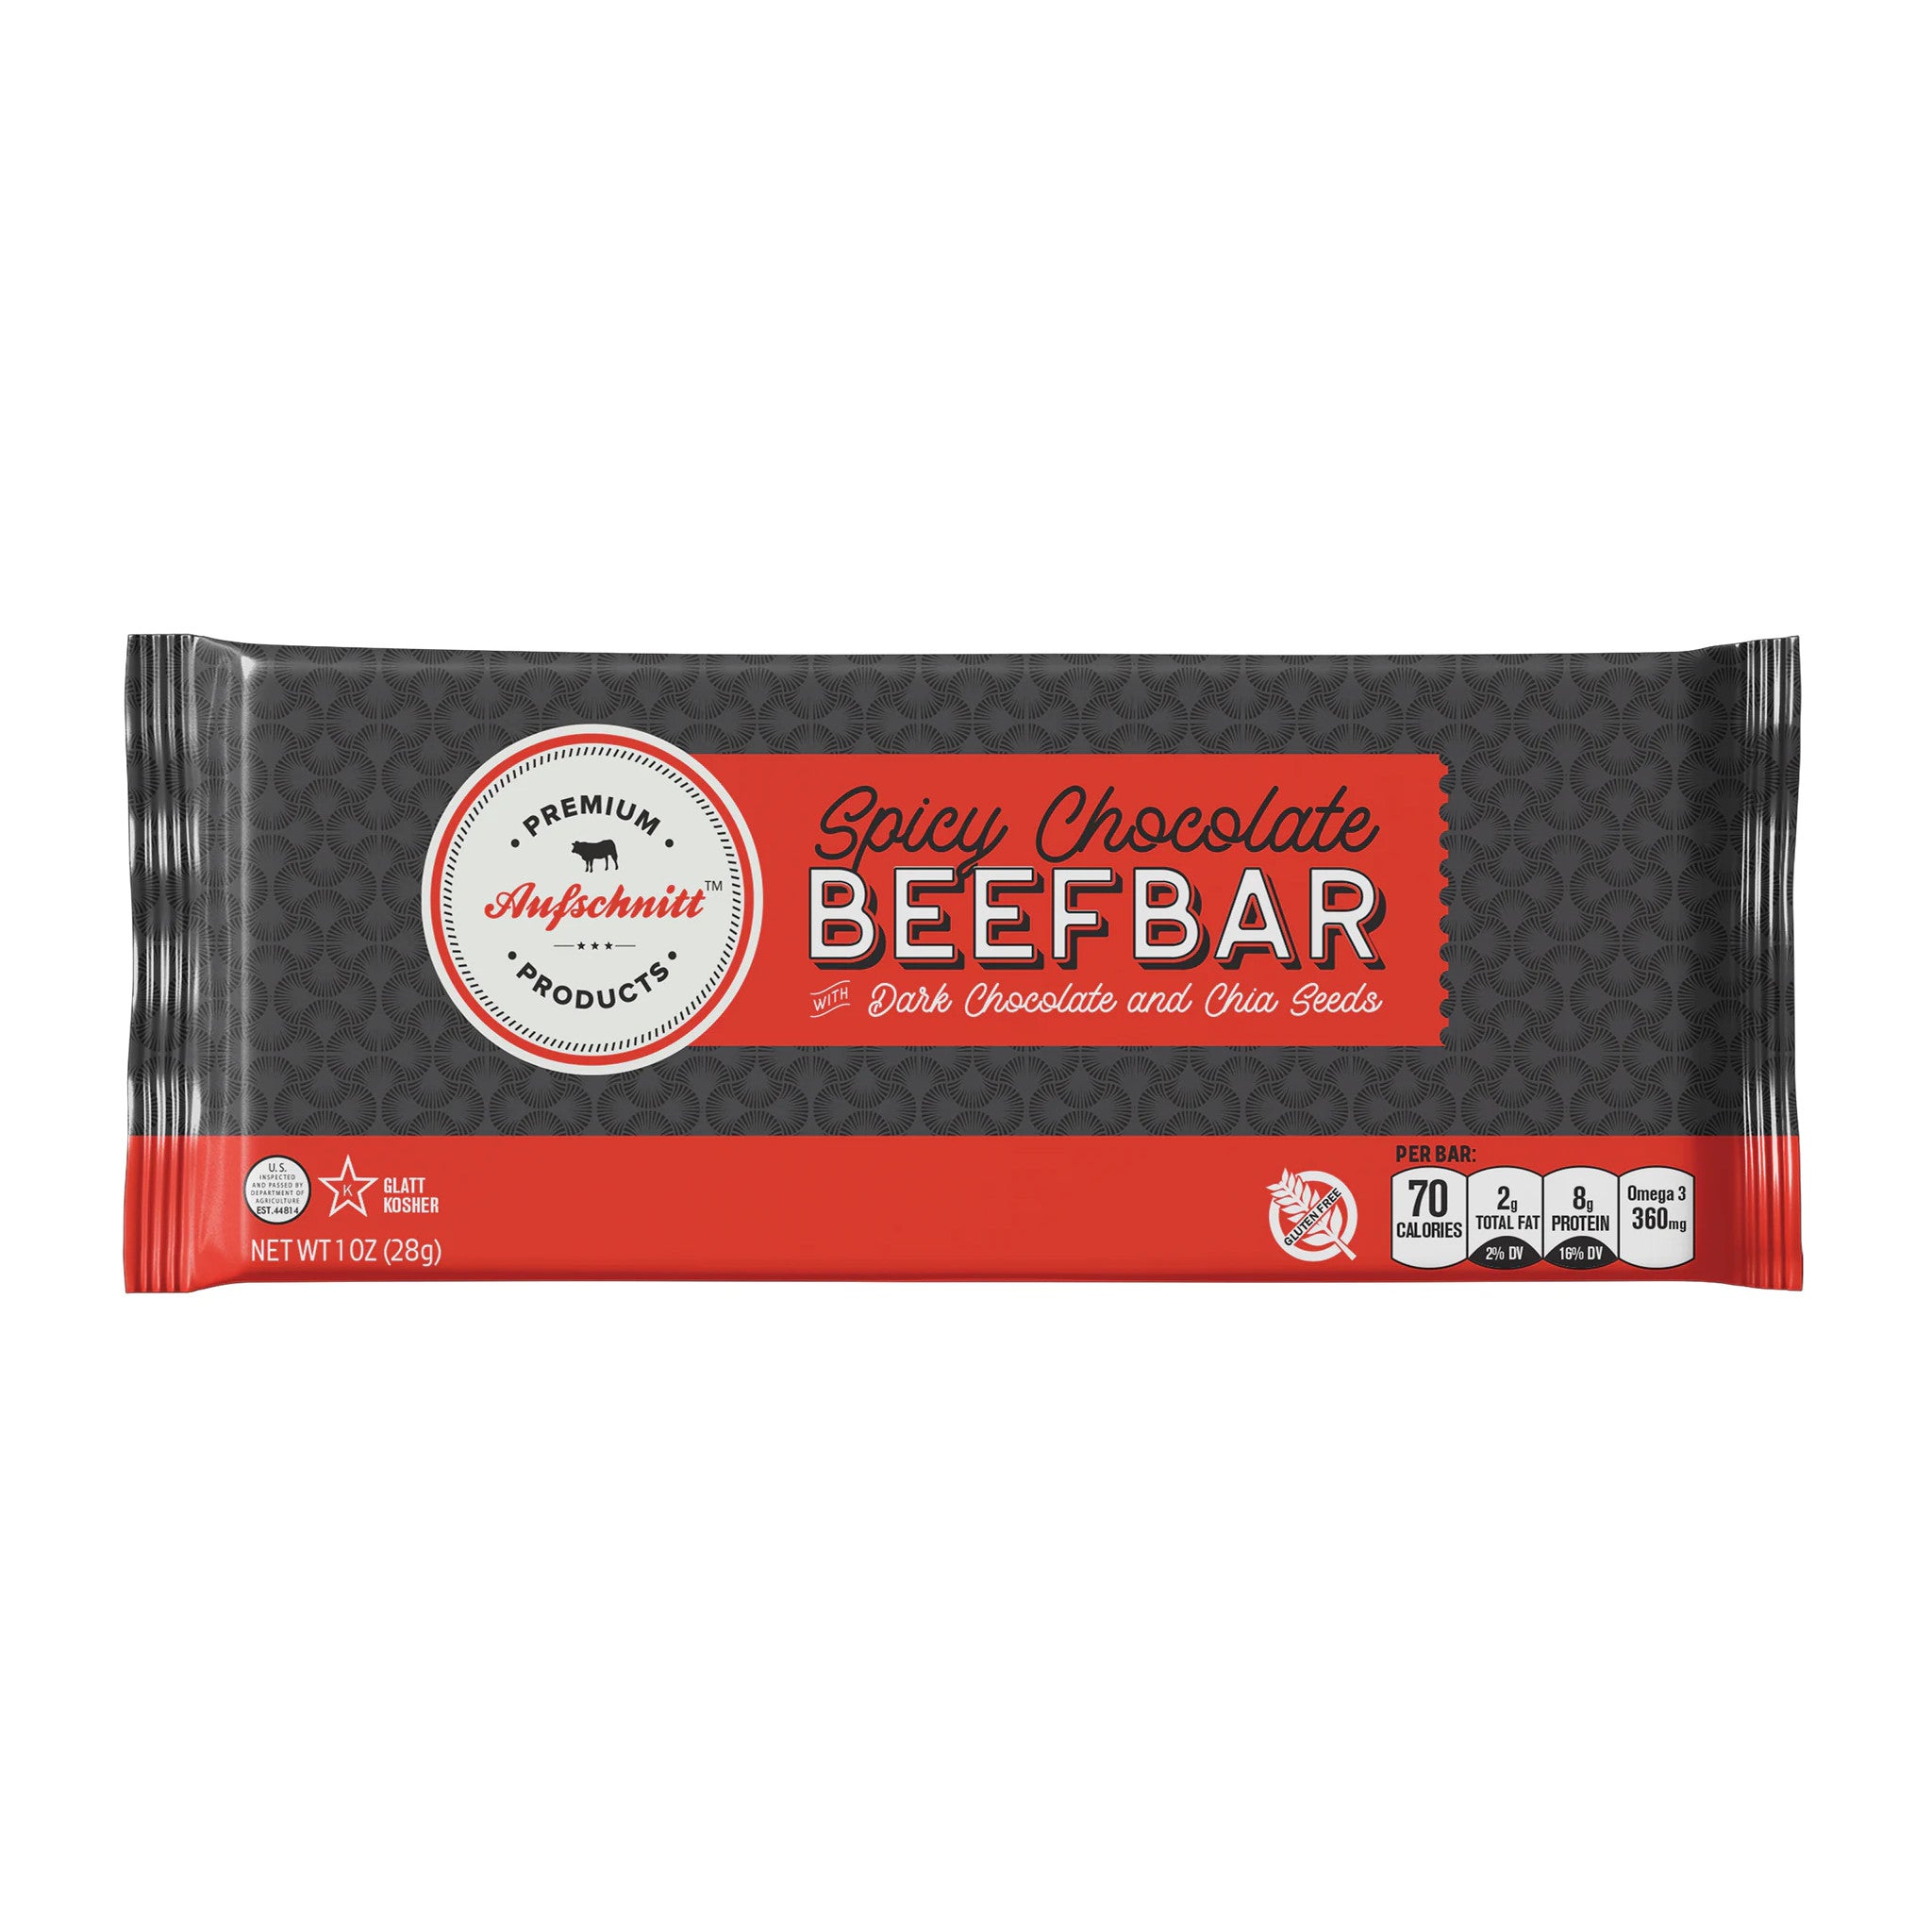 Spicy Chocolate Beef Bar